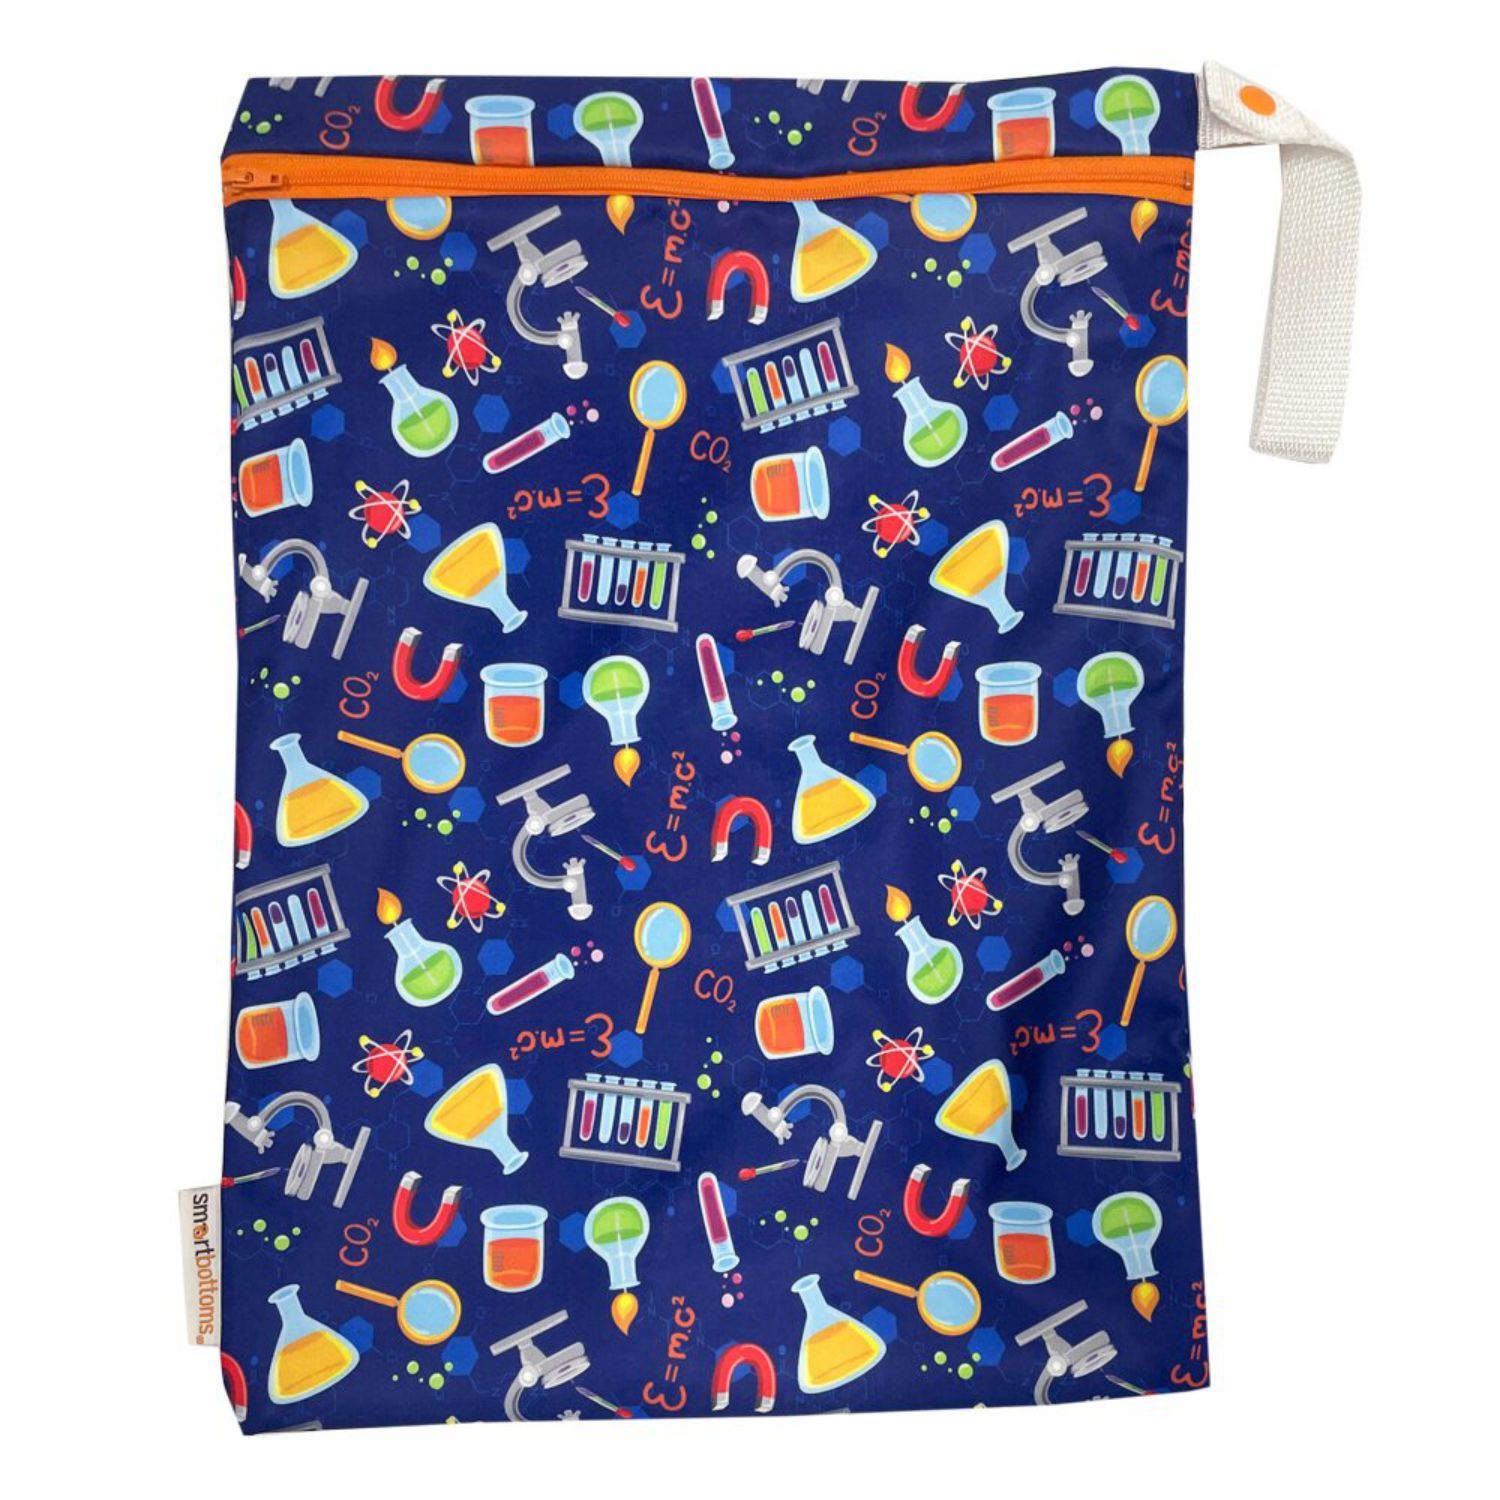 Smart Bottoms On the Go Wet Bag (M) Pattern: Periodically